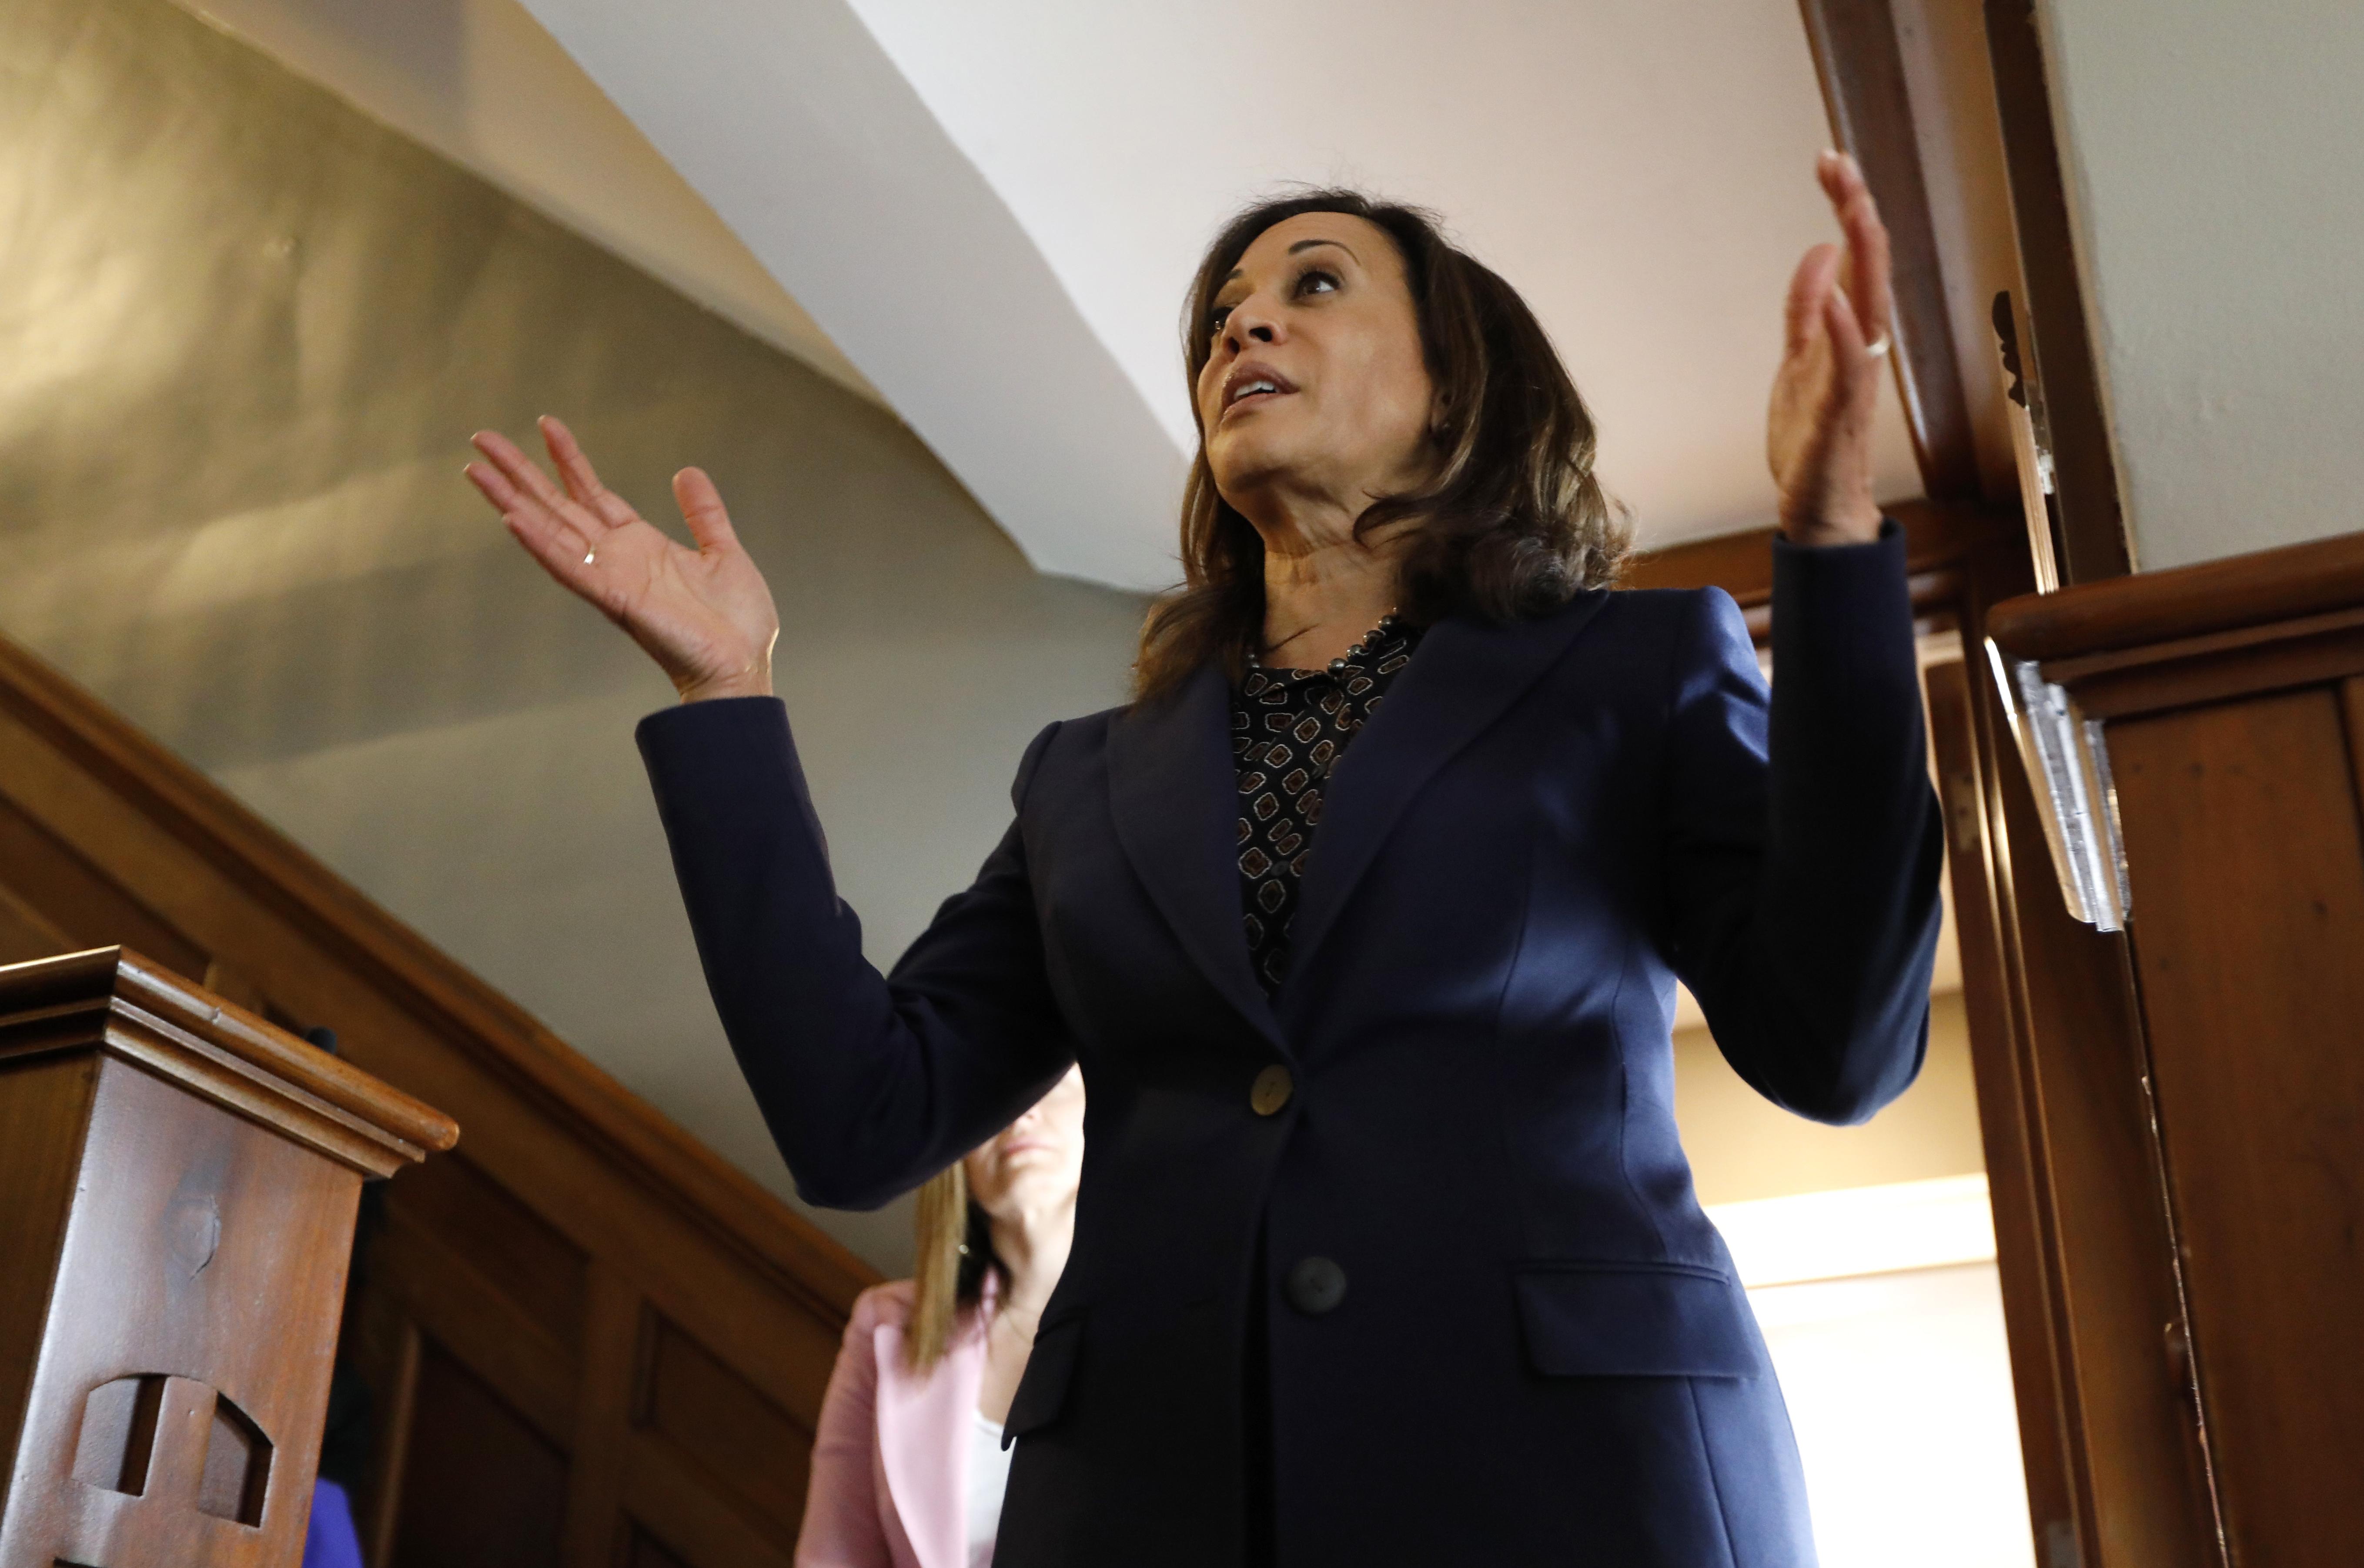 2020 Democrats raising less money as donors sit on sidelines | The Spokesman-Review5435 x 3606